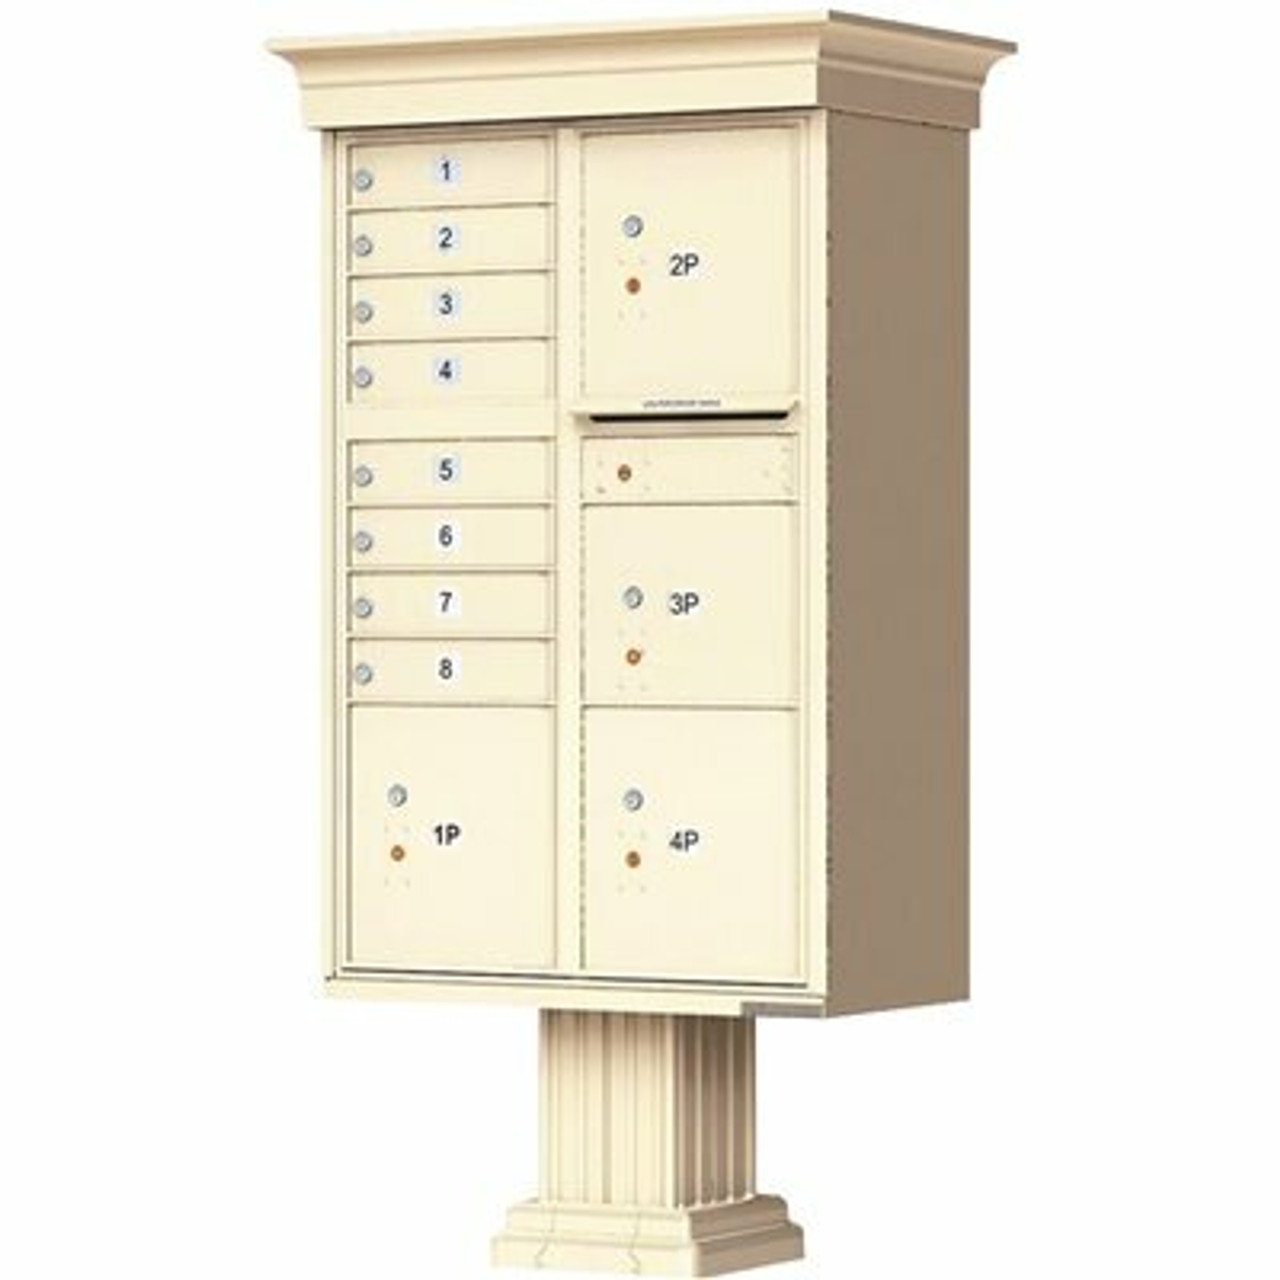 Florence 1570 Series 8-Mailboxes, 1-Outgoing, 4-Parcel Lockers, Vital Cluster Box Unit With Vogue Classic Accessories - 2474398